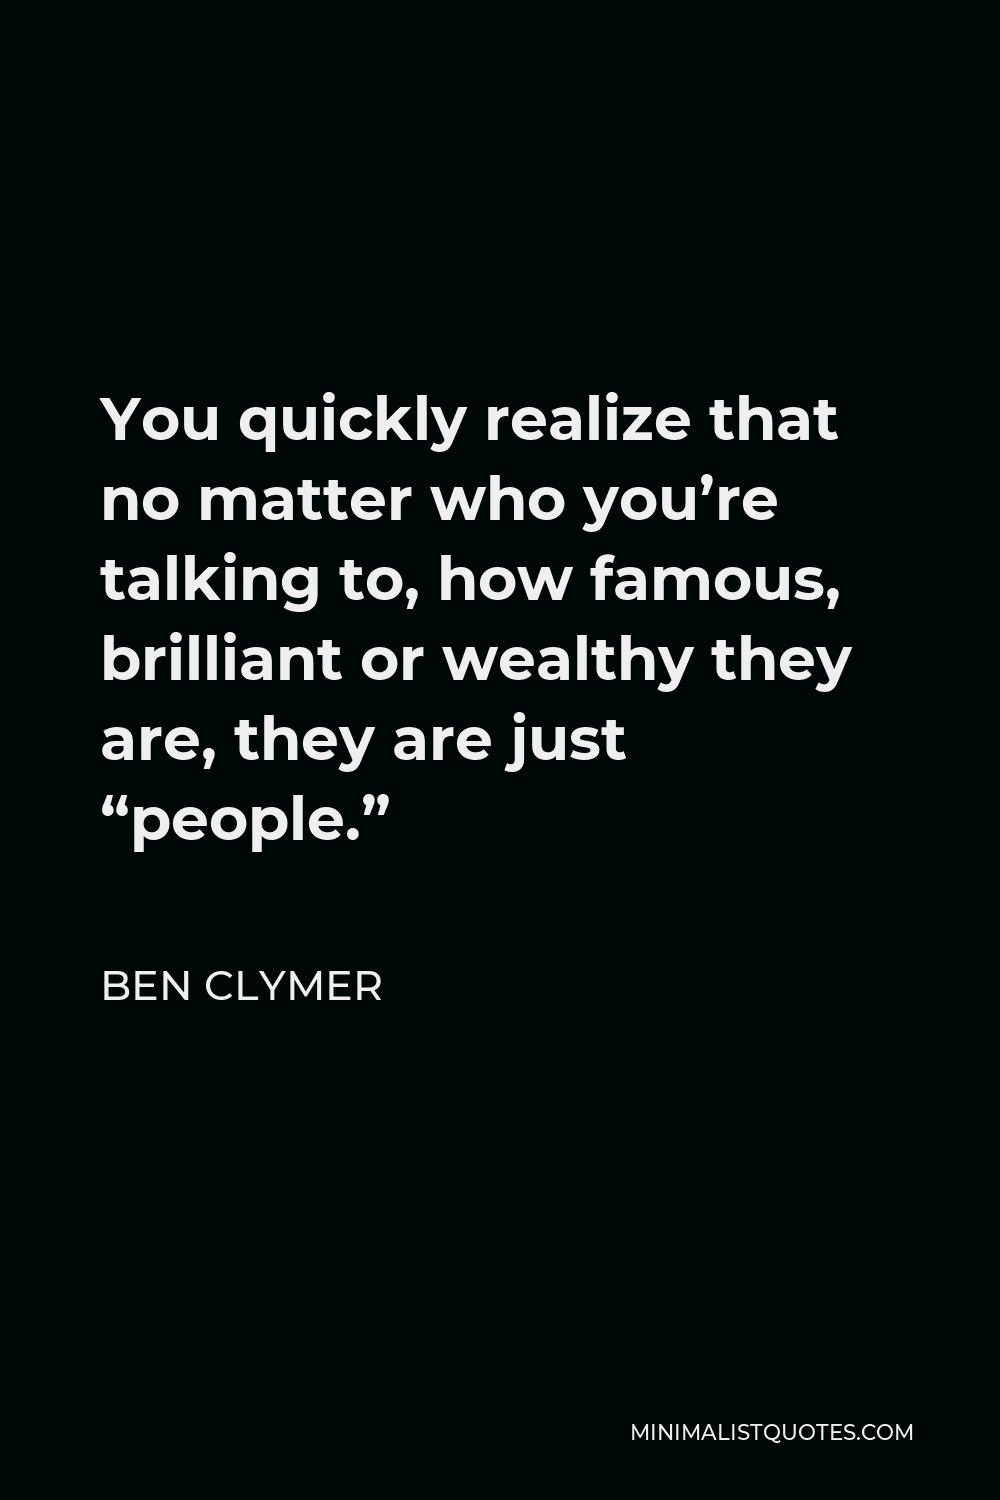 Ben Clymer Quote - You quickly realize that no matter who you’re talking to, how famous, brilliant or wealthy they are, they are just “people.”